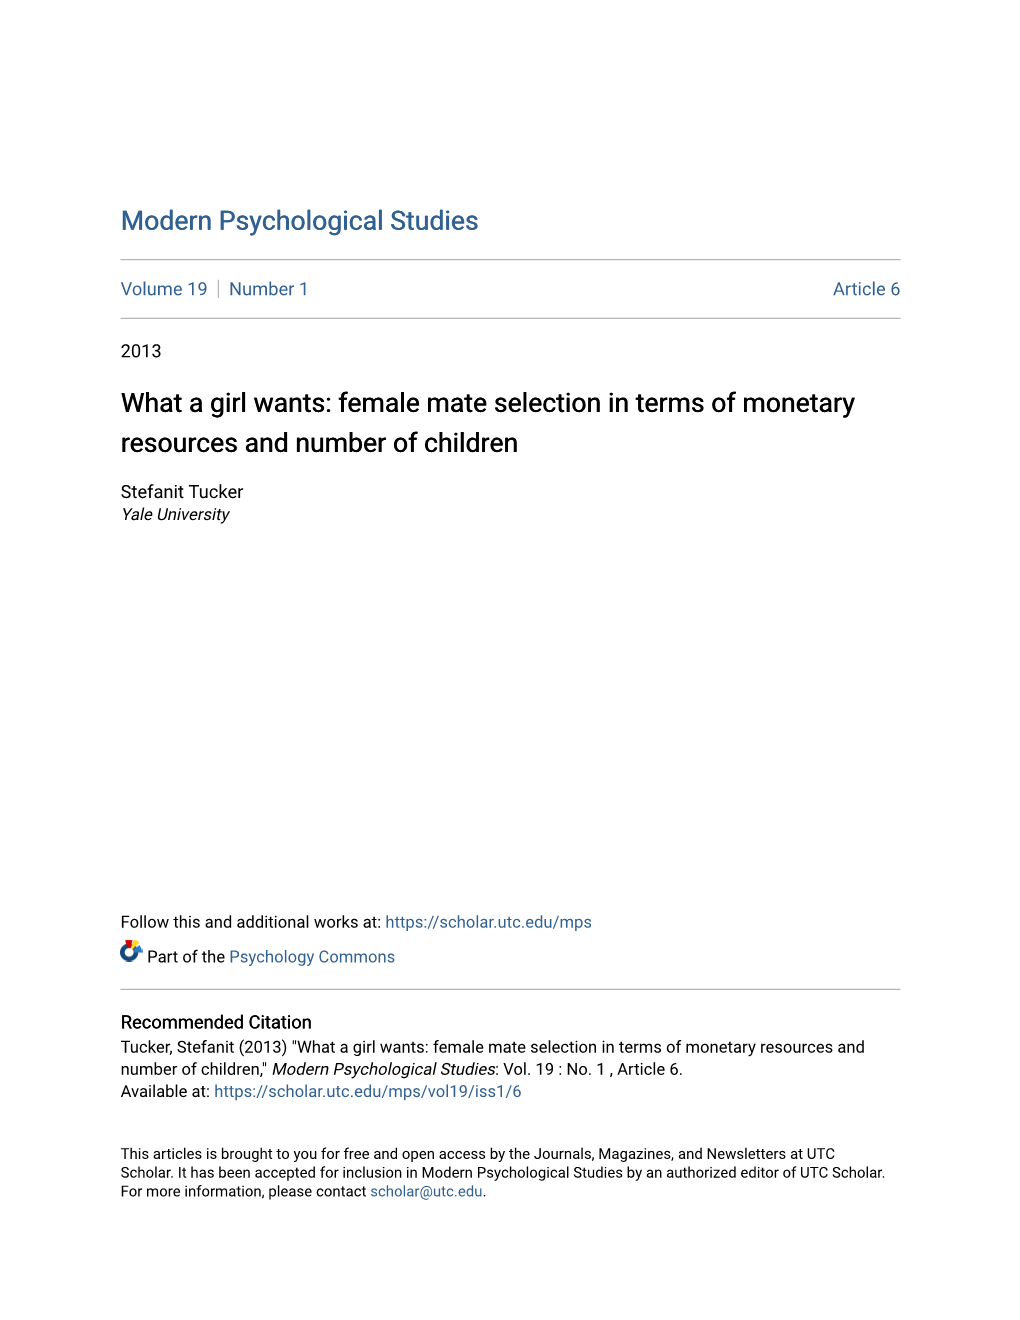 Female Mate Selection in Terms of Monetary Resources and Number of Children